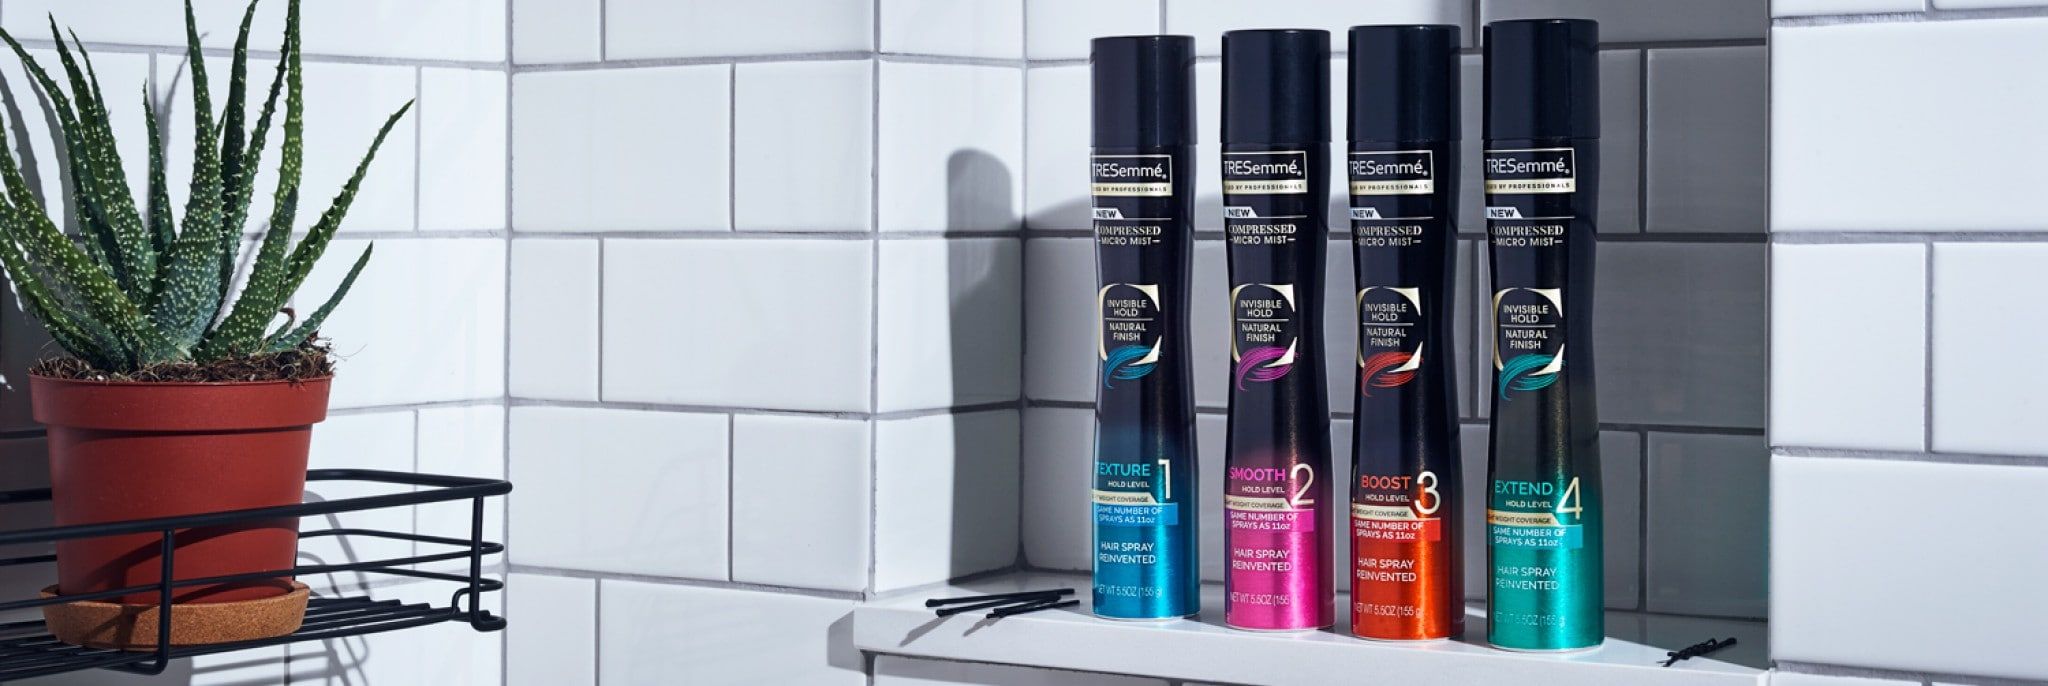 TRESemme Hair Spray Products